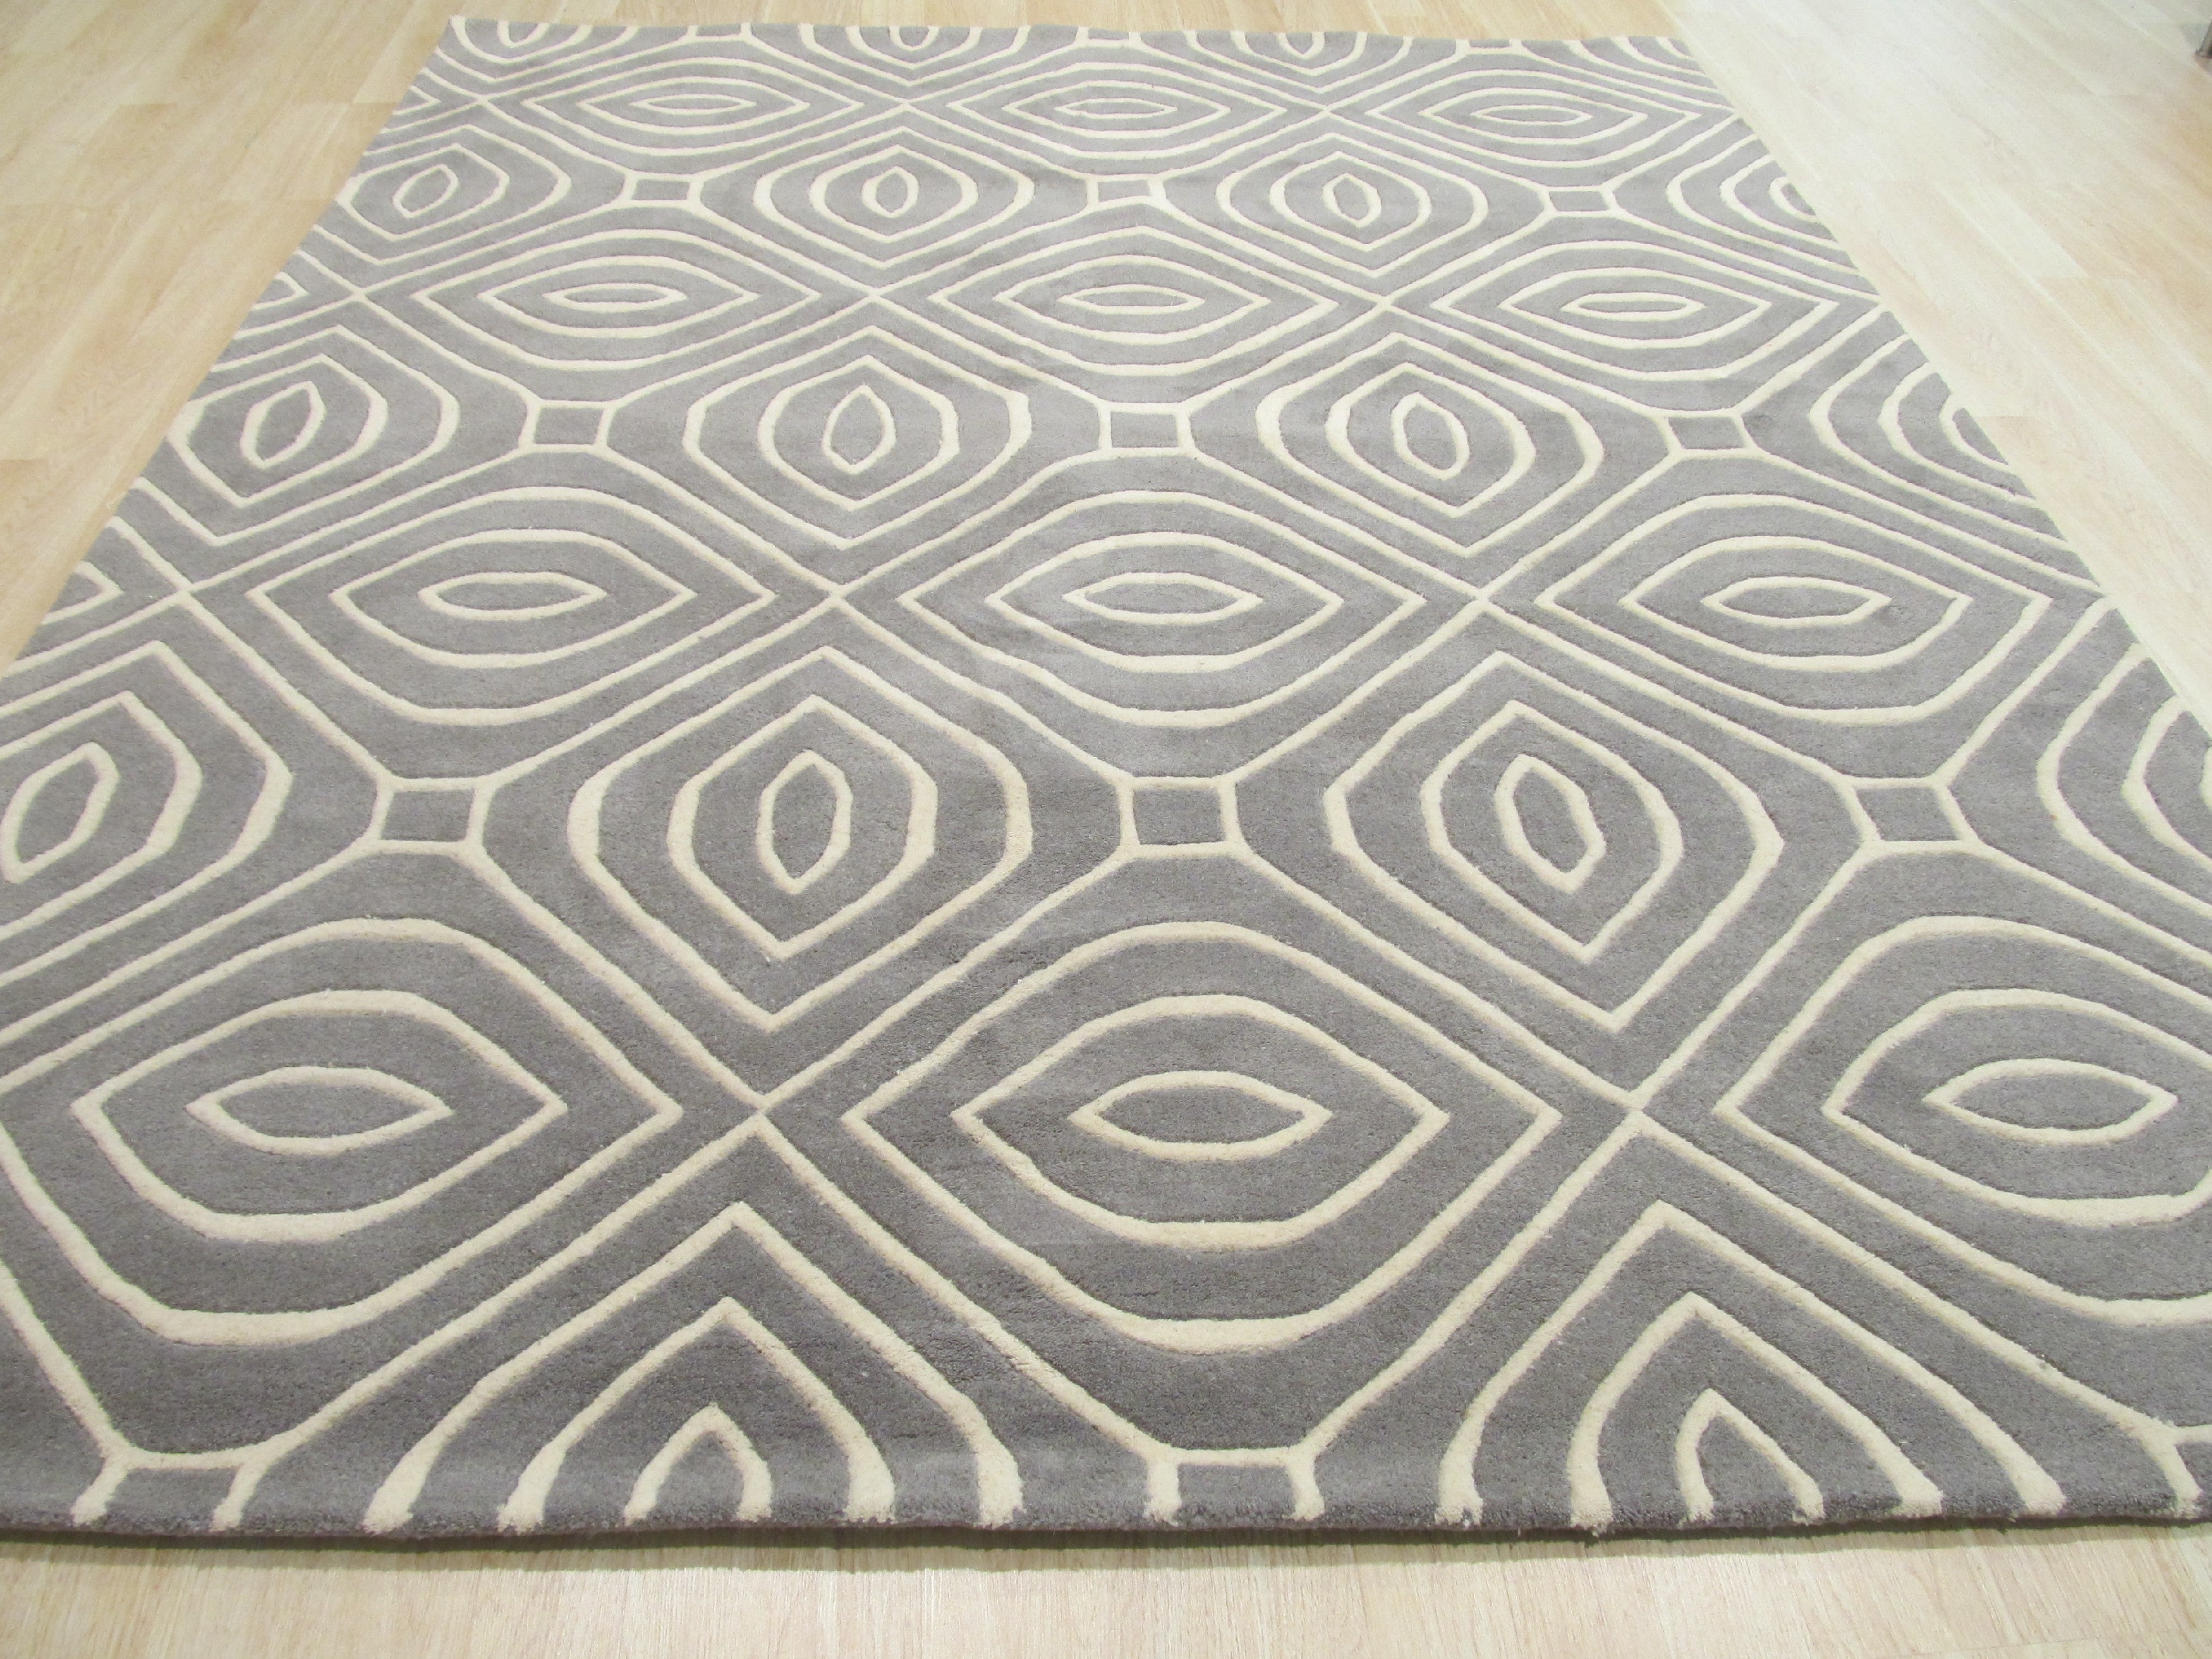 EORC Hand-tufted Wool Gray Contemporary Geometric Marla Rug